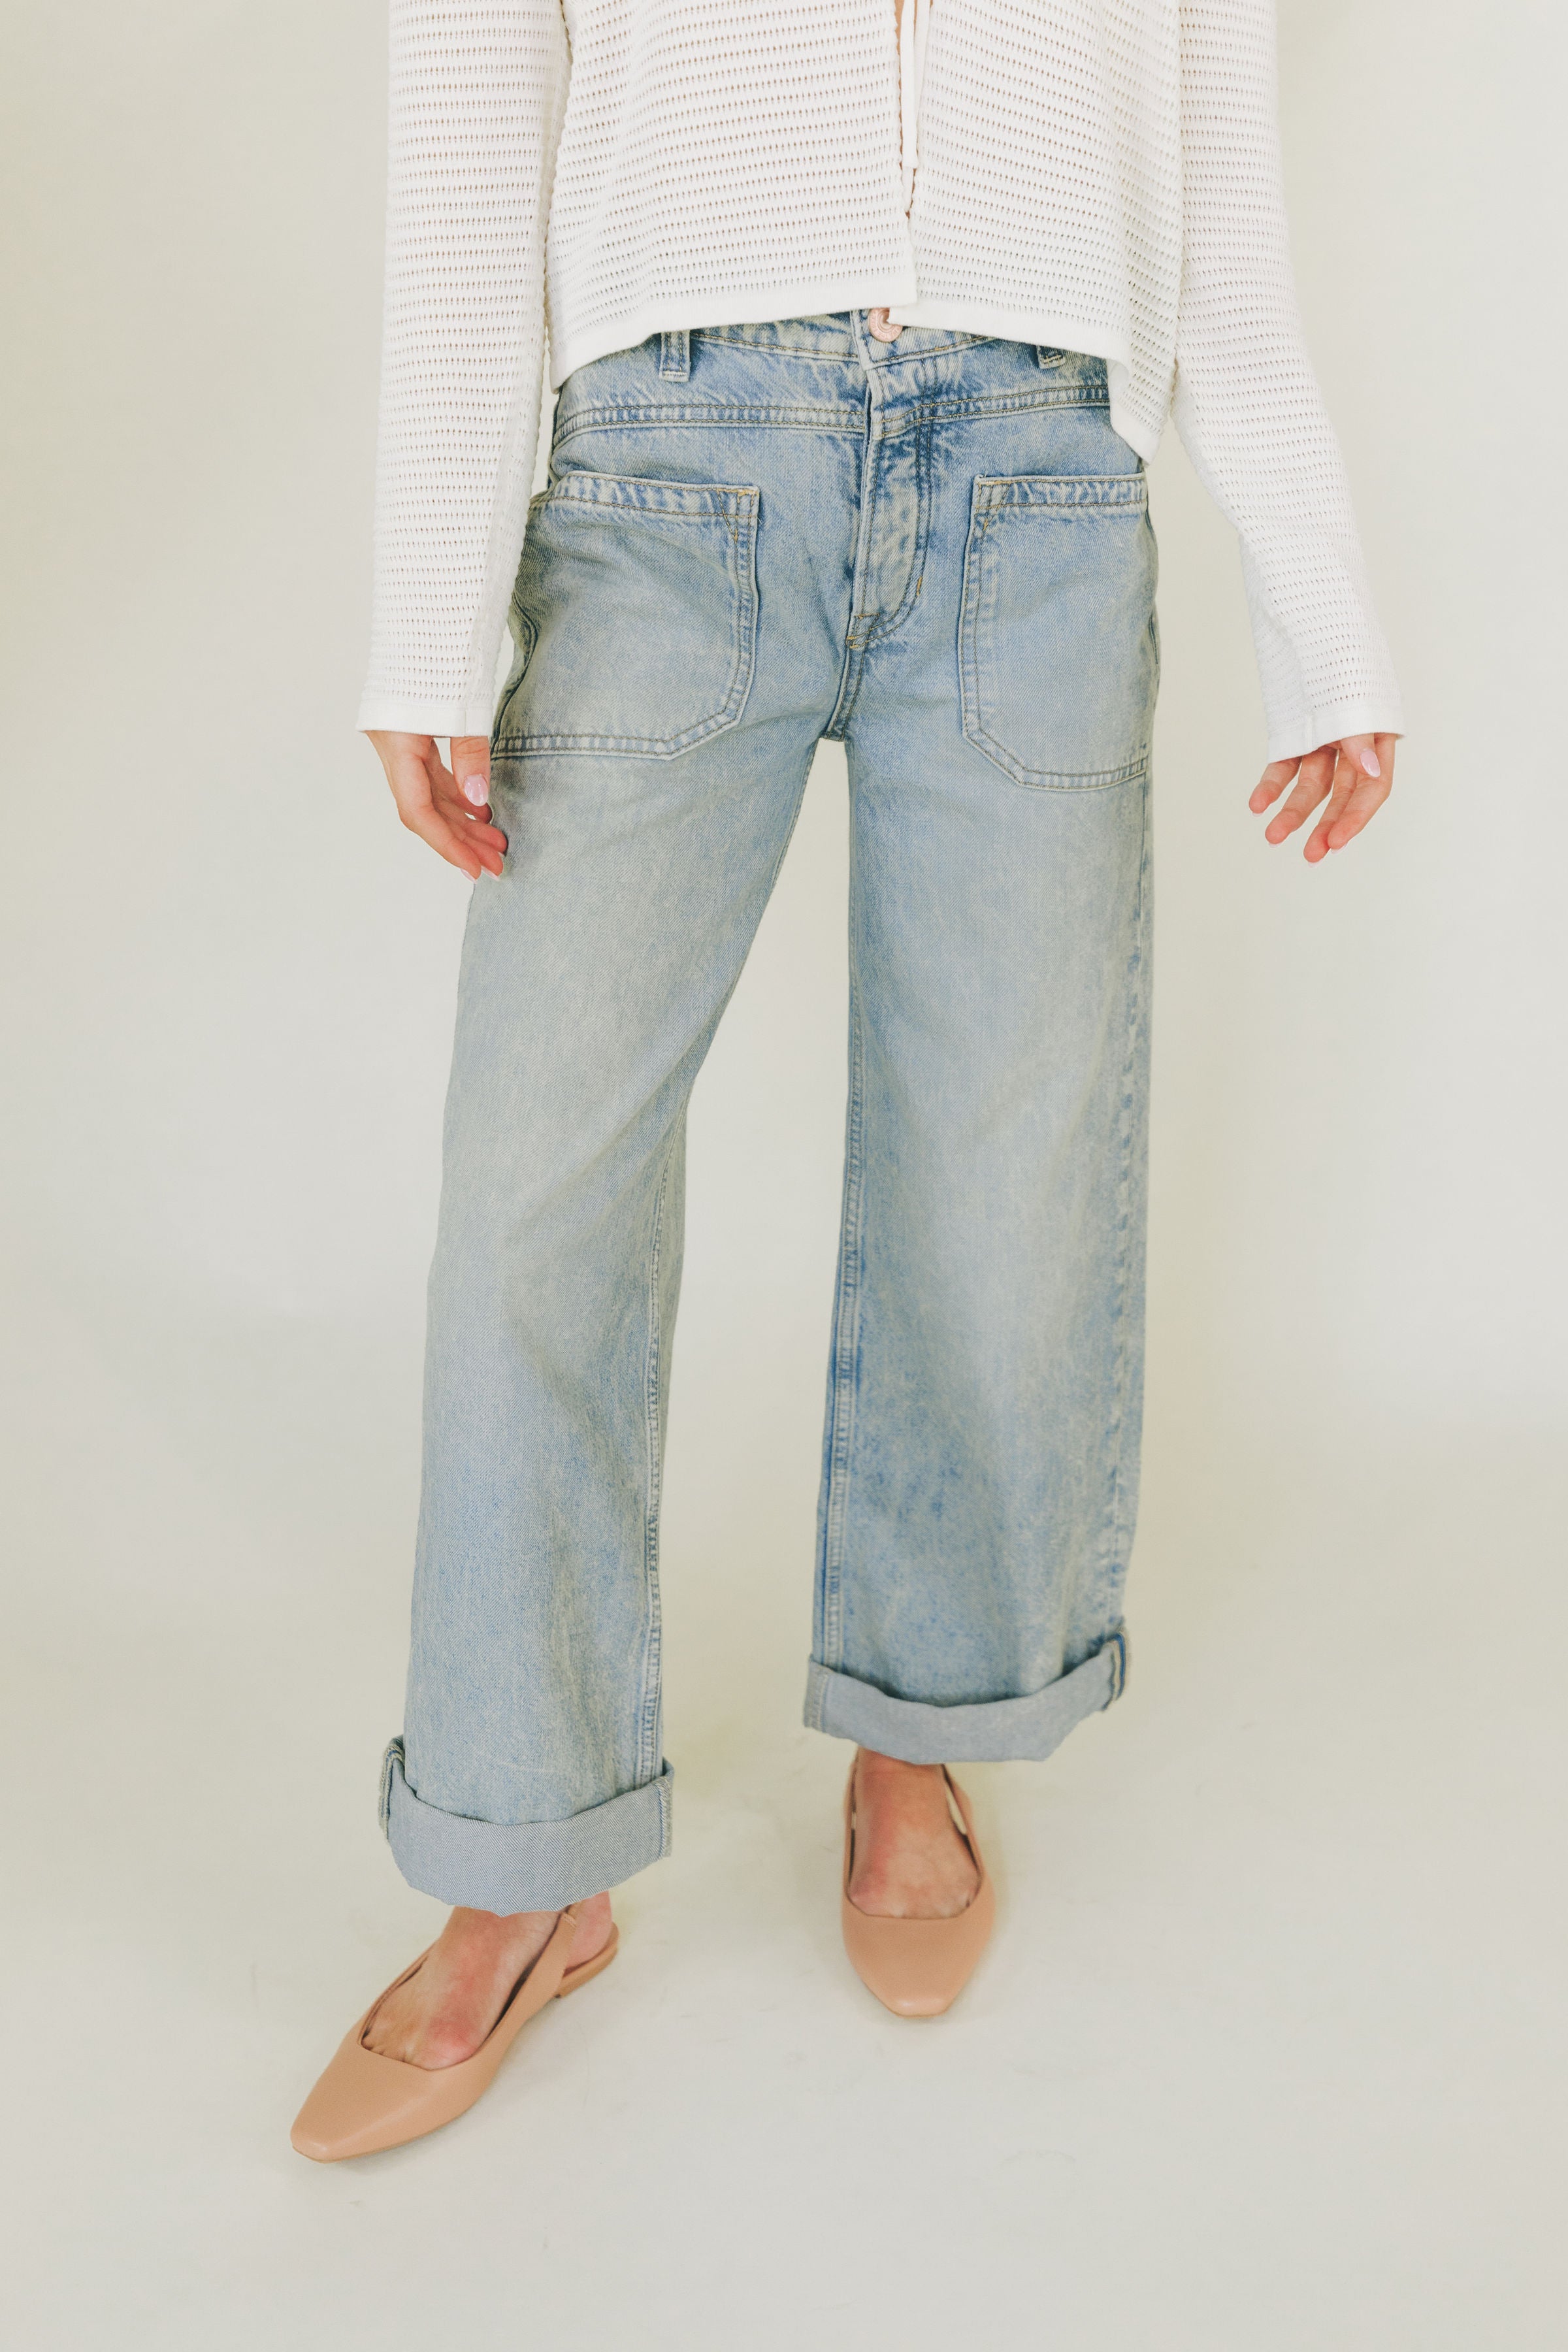 FREE PEOPLE - Palmer Cuffed Jeans - 2 Colors